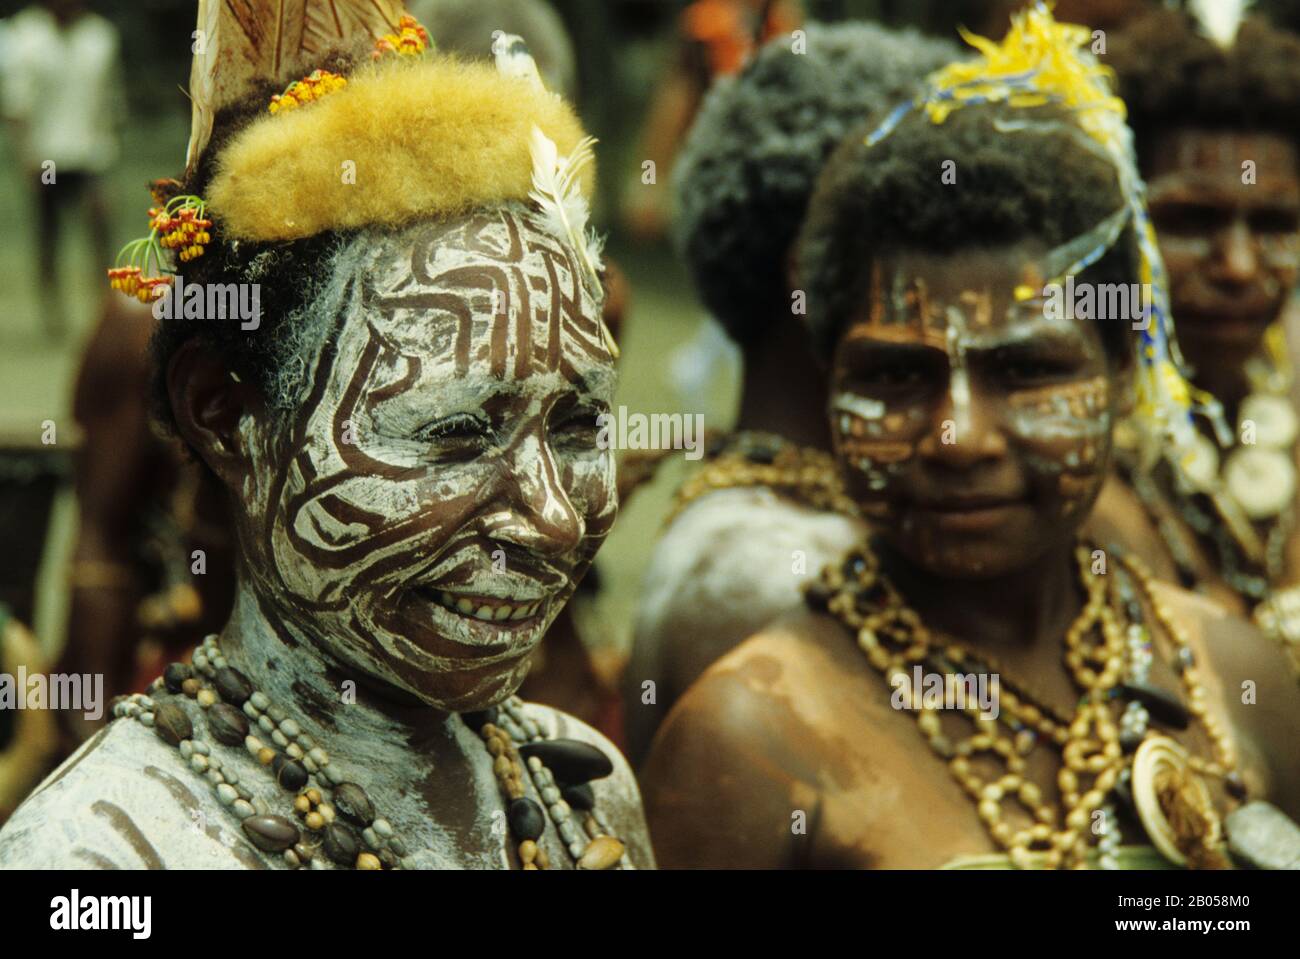 PAPUA NEW GUINEA, SEPIK RIVER, NEAR ANGORAM, SMALL VILLAGE, WOMEN WITH PAINTED FACES Stock Photo